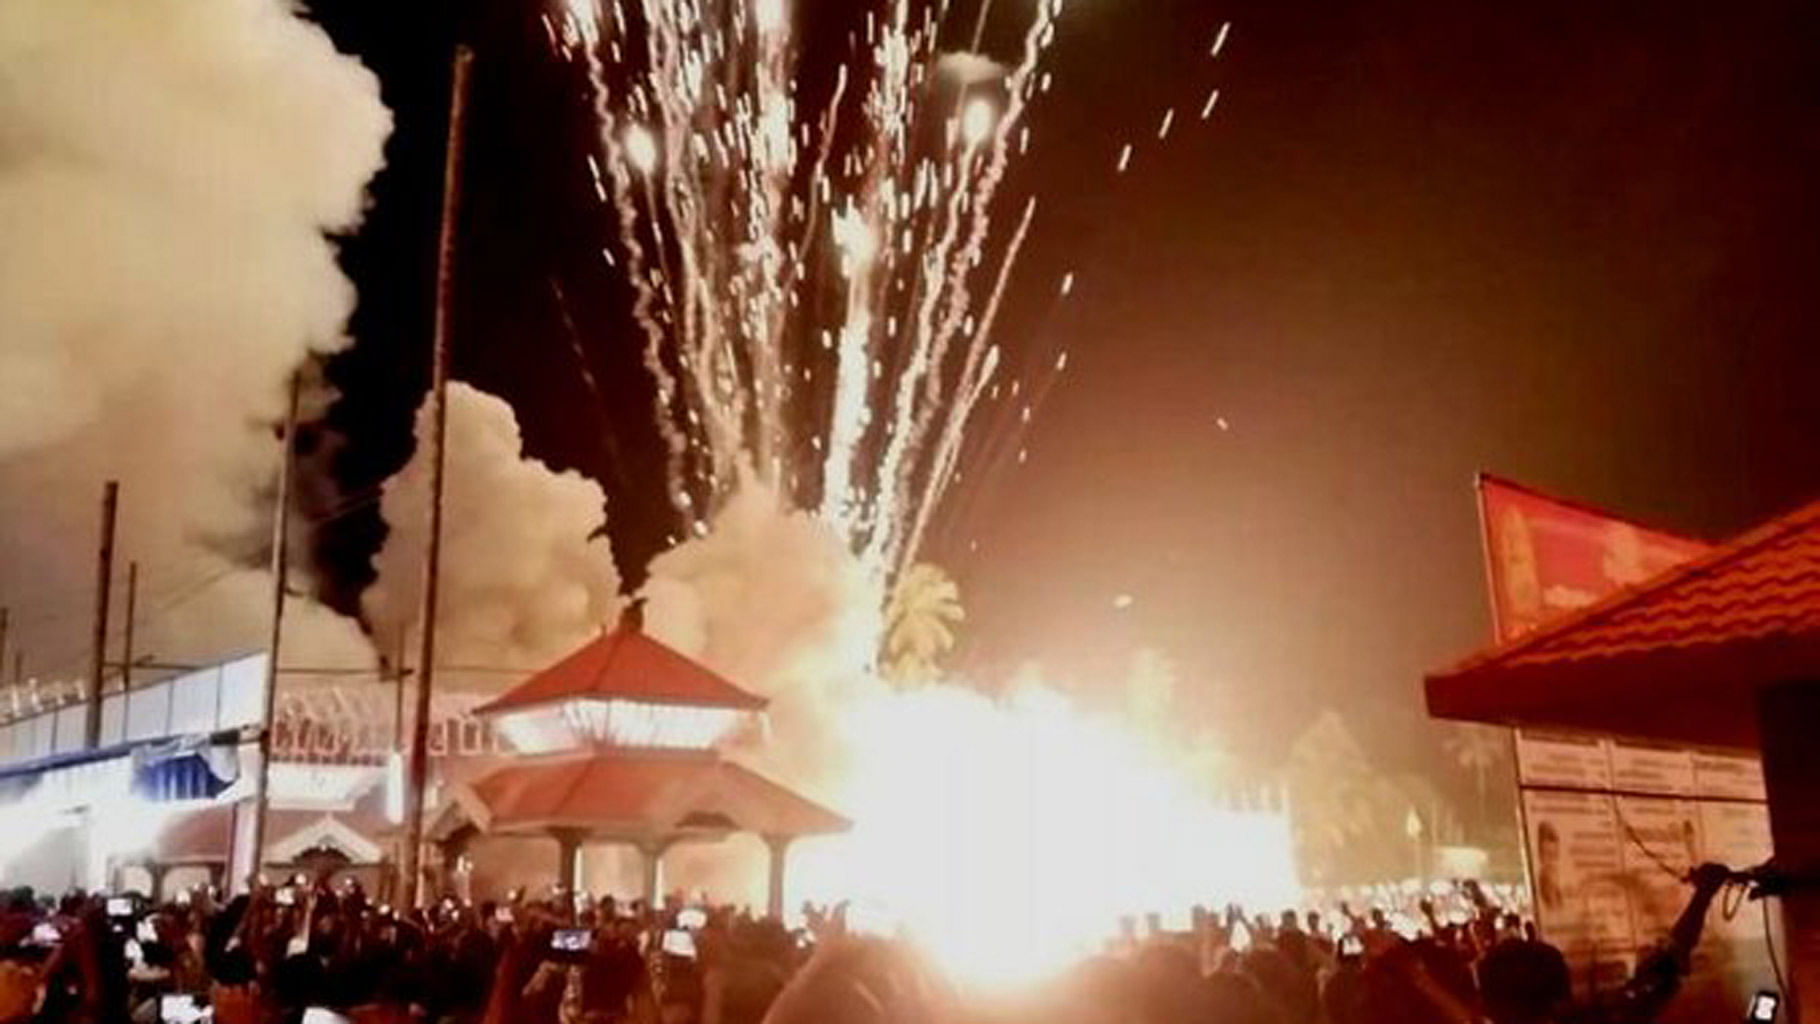 

The temple in Kollam, Kerala organises a competitive fireworks display each year. (Photo: The News Minute)